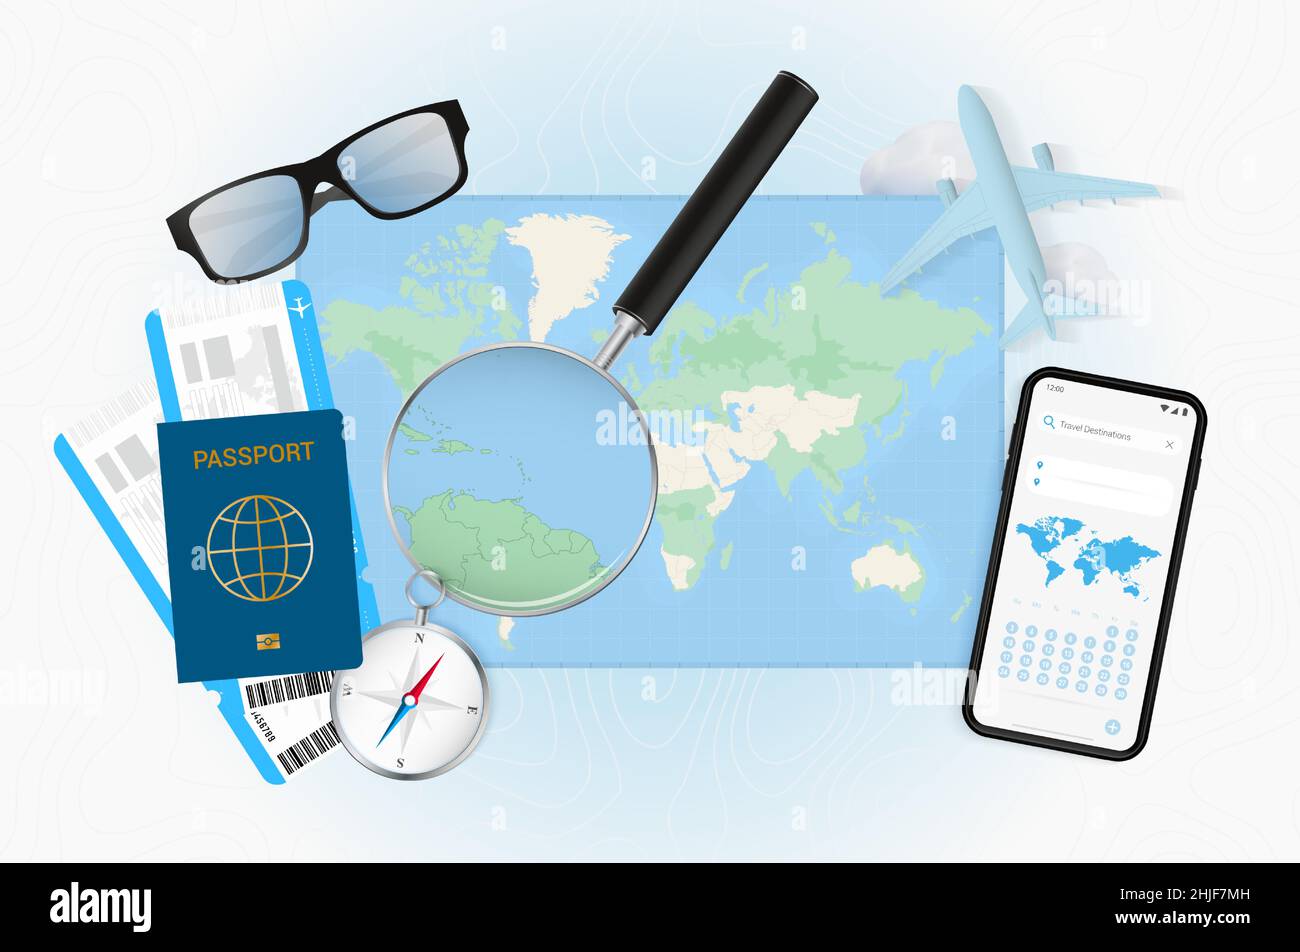 Conceptual illustration of a trip to Grenada with travel gear. World map with compass, passport, tickets, cell phone, plane and glass. Stock Vector